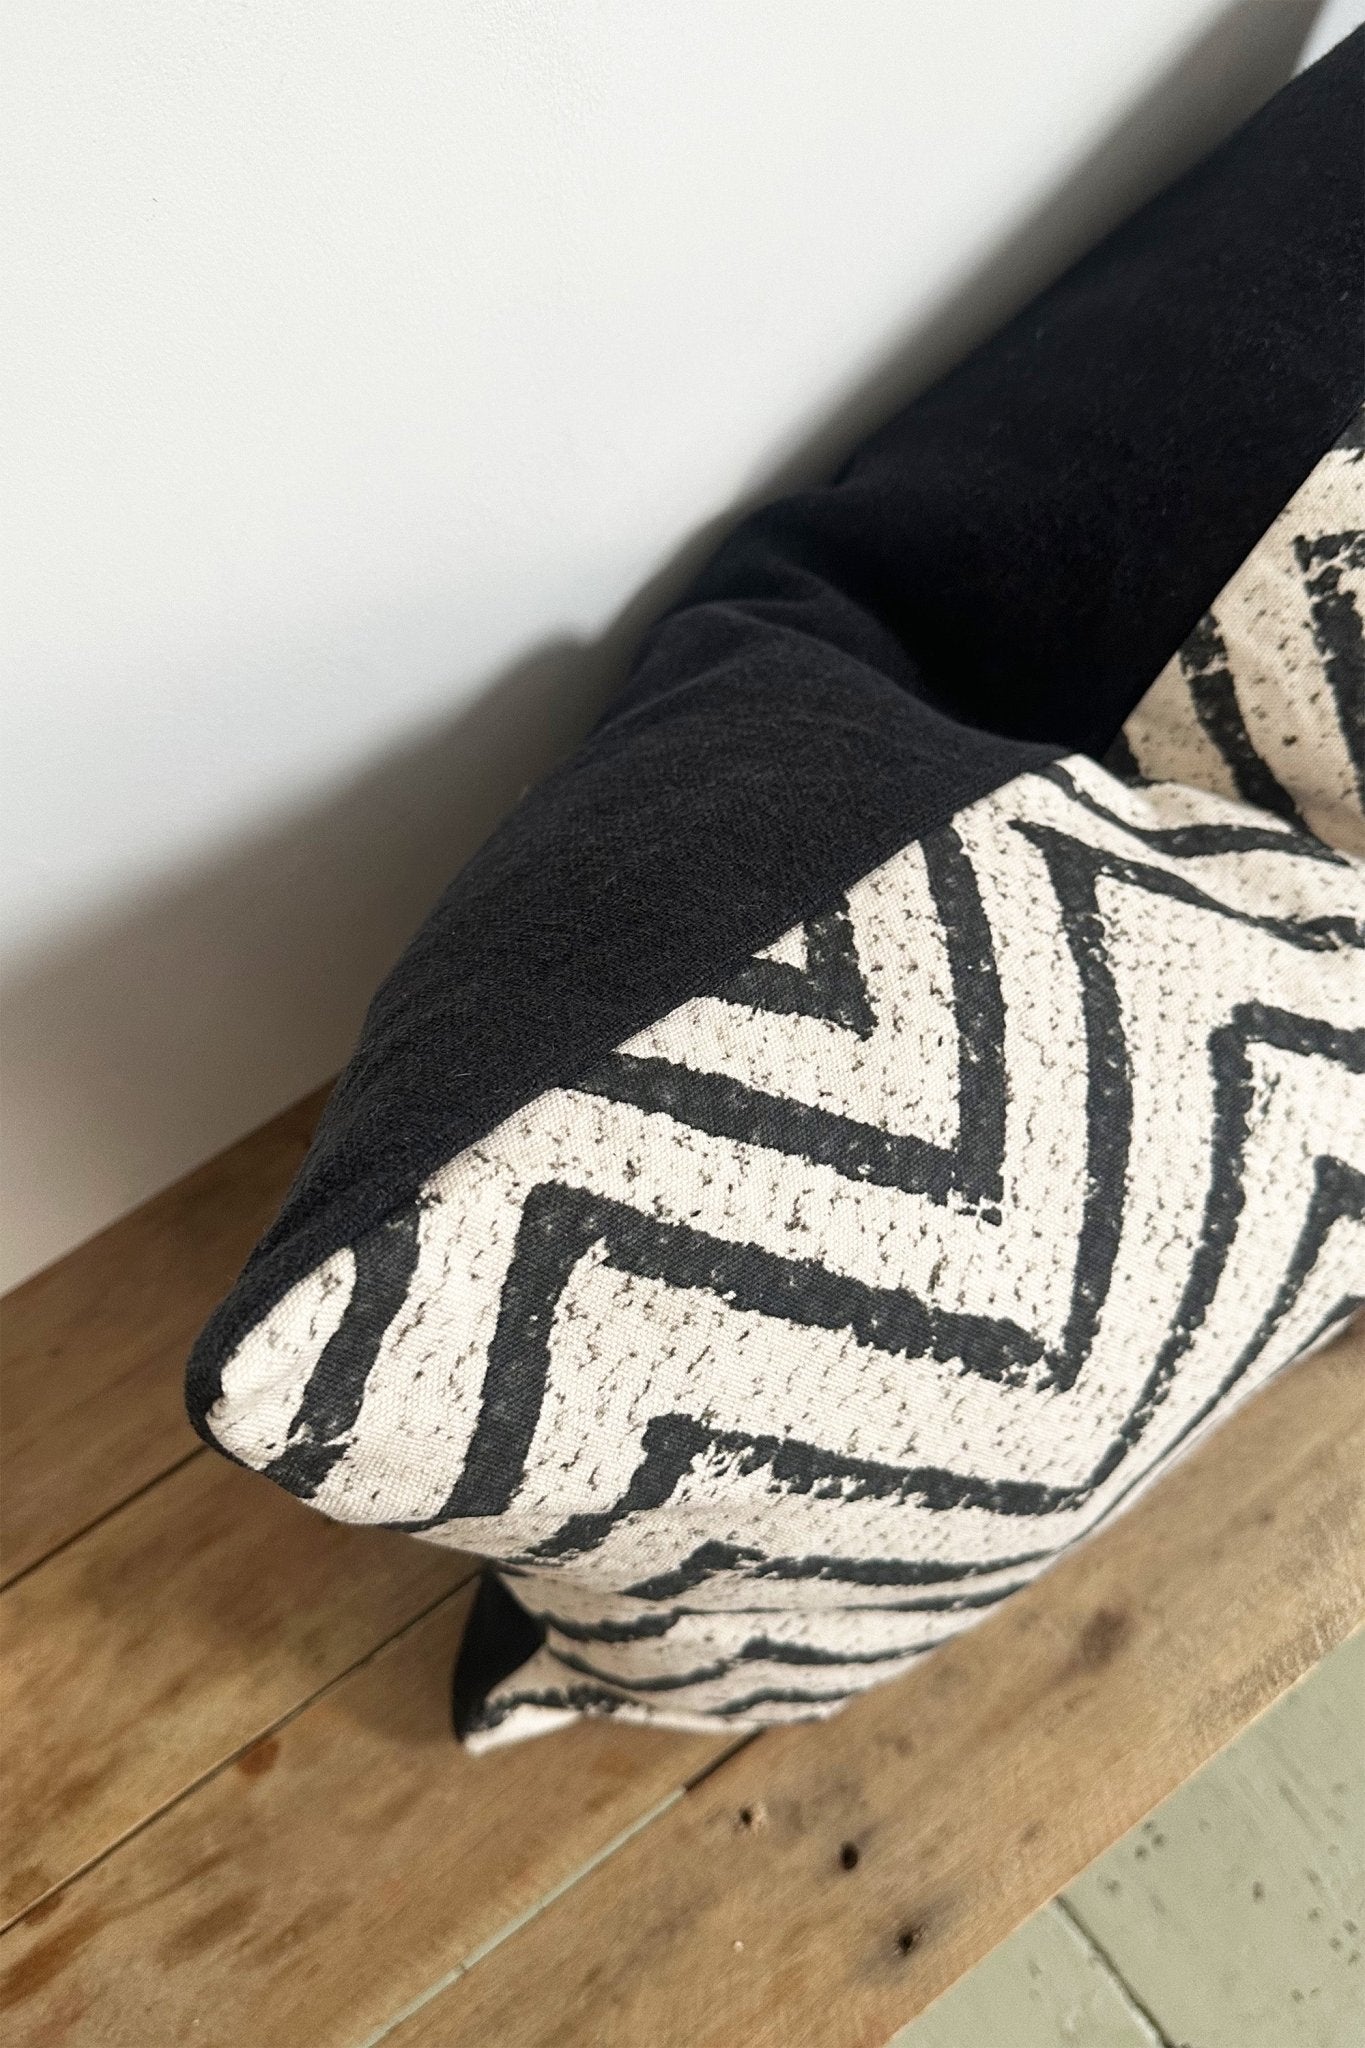 Large Black and Cream Chevron Cushion Cover in Cotton and Linen - Biggs & Hill - Cushion Covers - 40cm stripe cushion - 60cm stripe cushion - beige black cushions